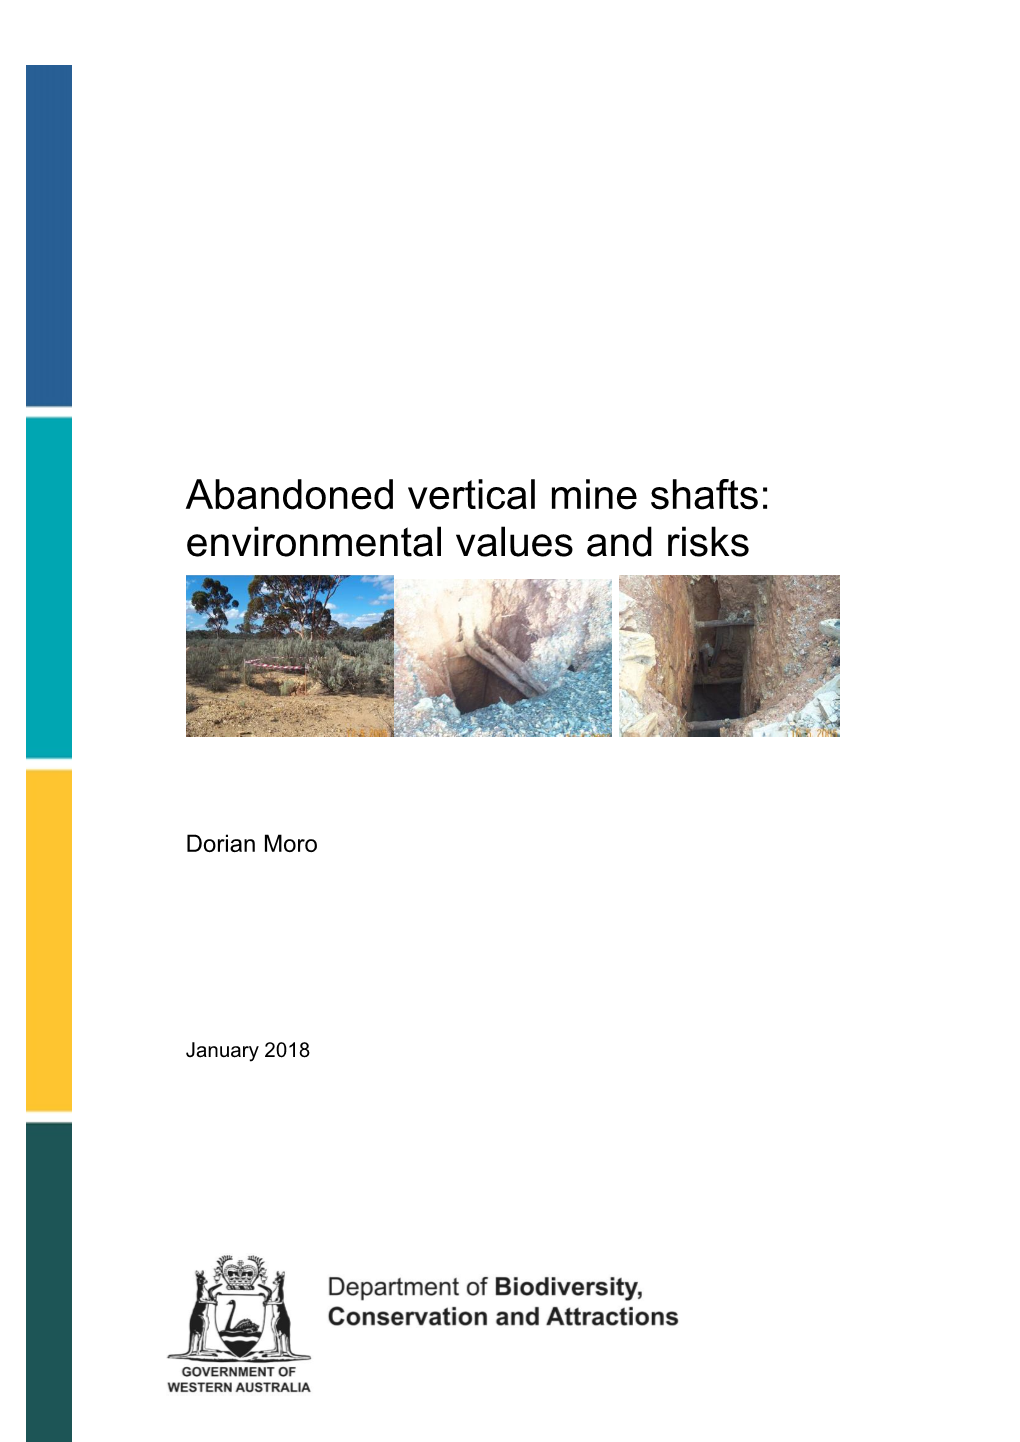 Abandoned Vertical Mine Shafts: Environmental Values and Risks